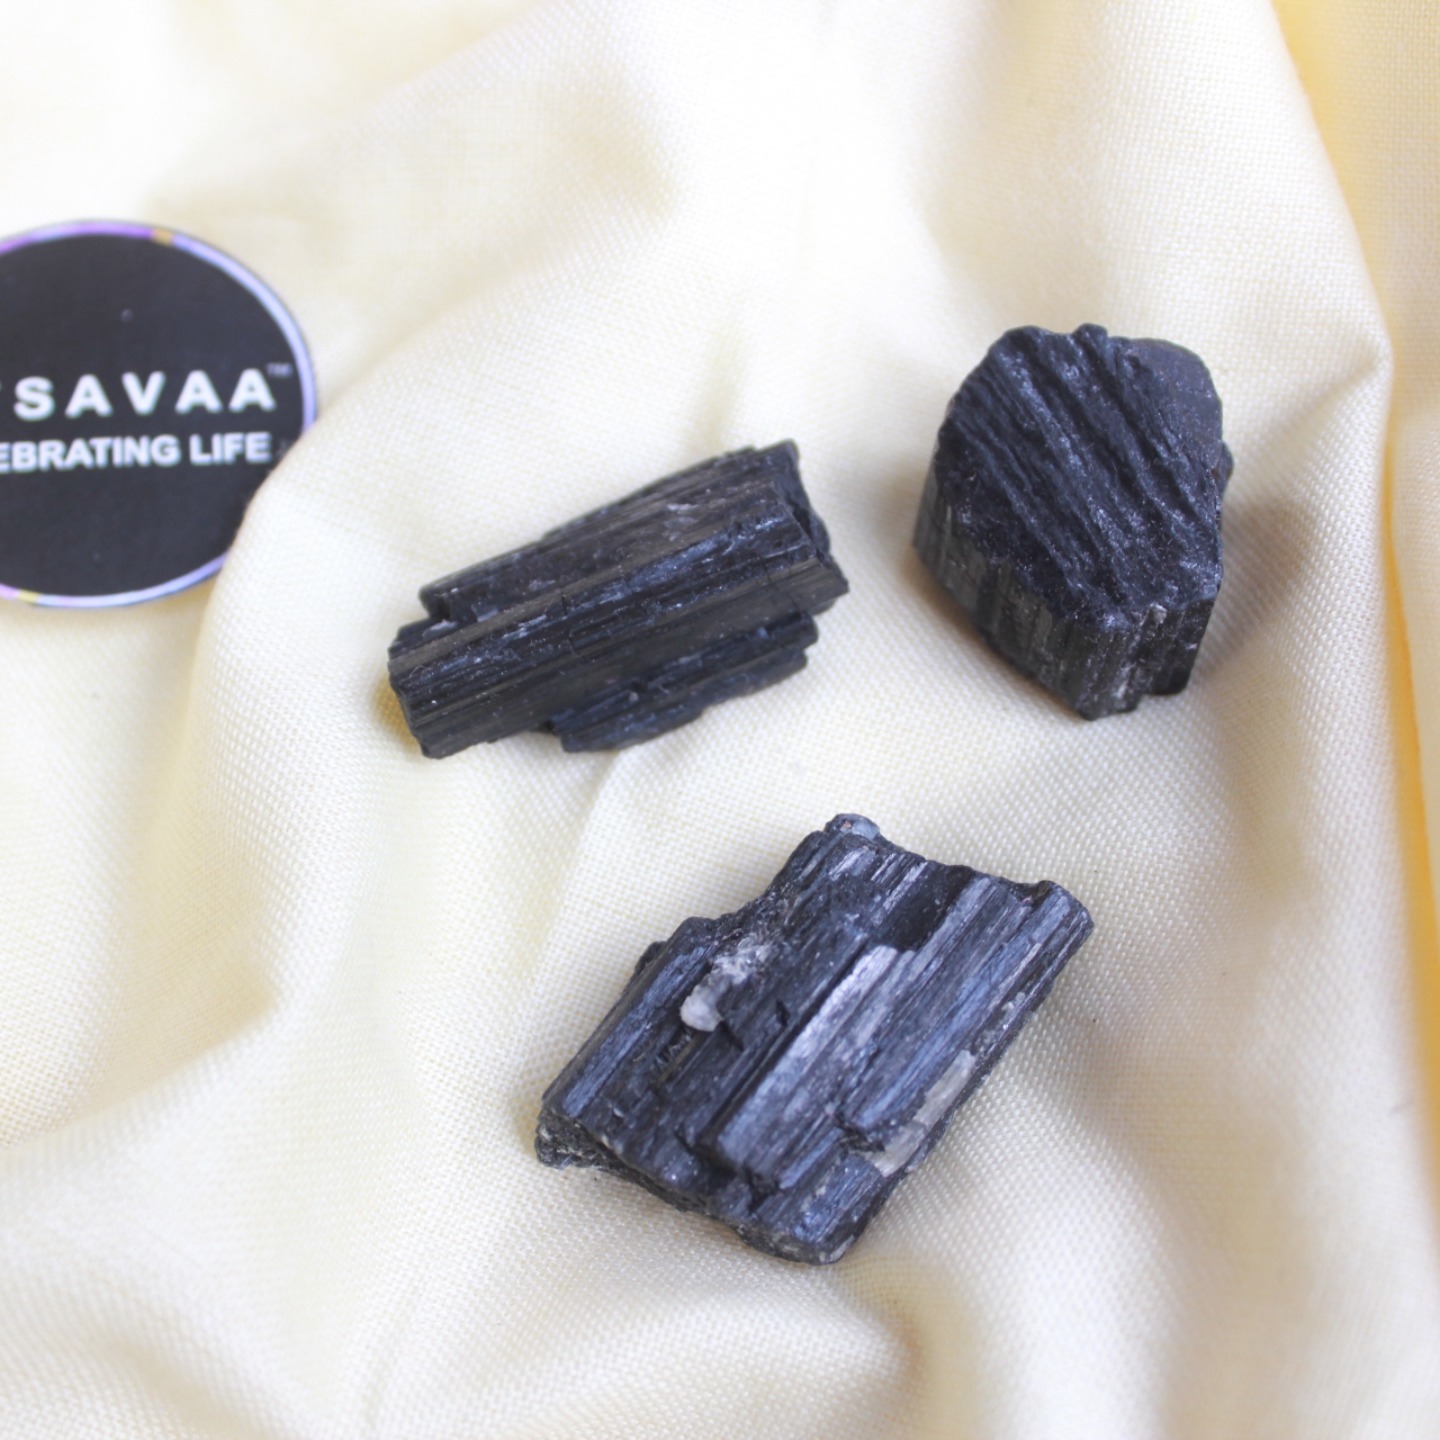 For PROTECTION - Black Tourmaline Raw Crystal 71g